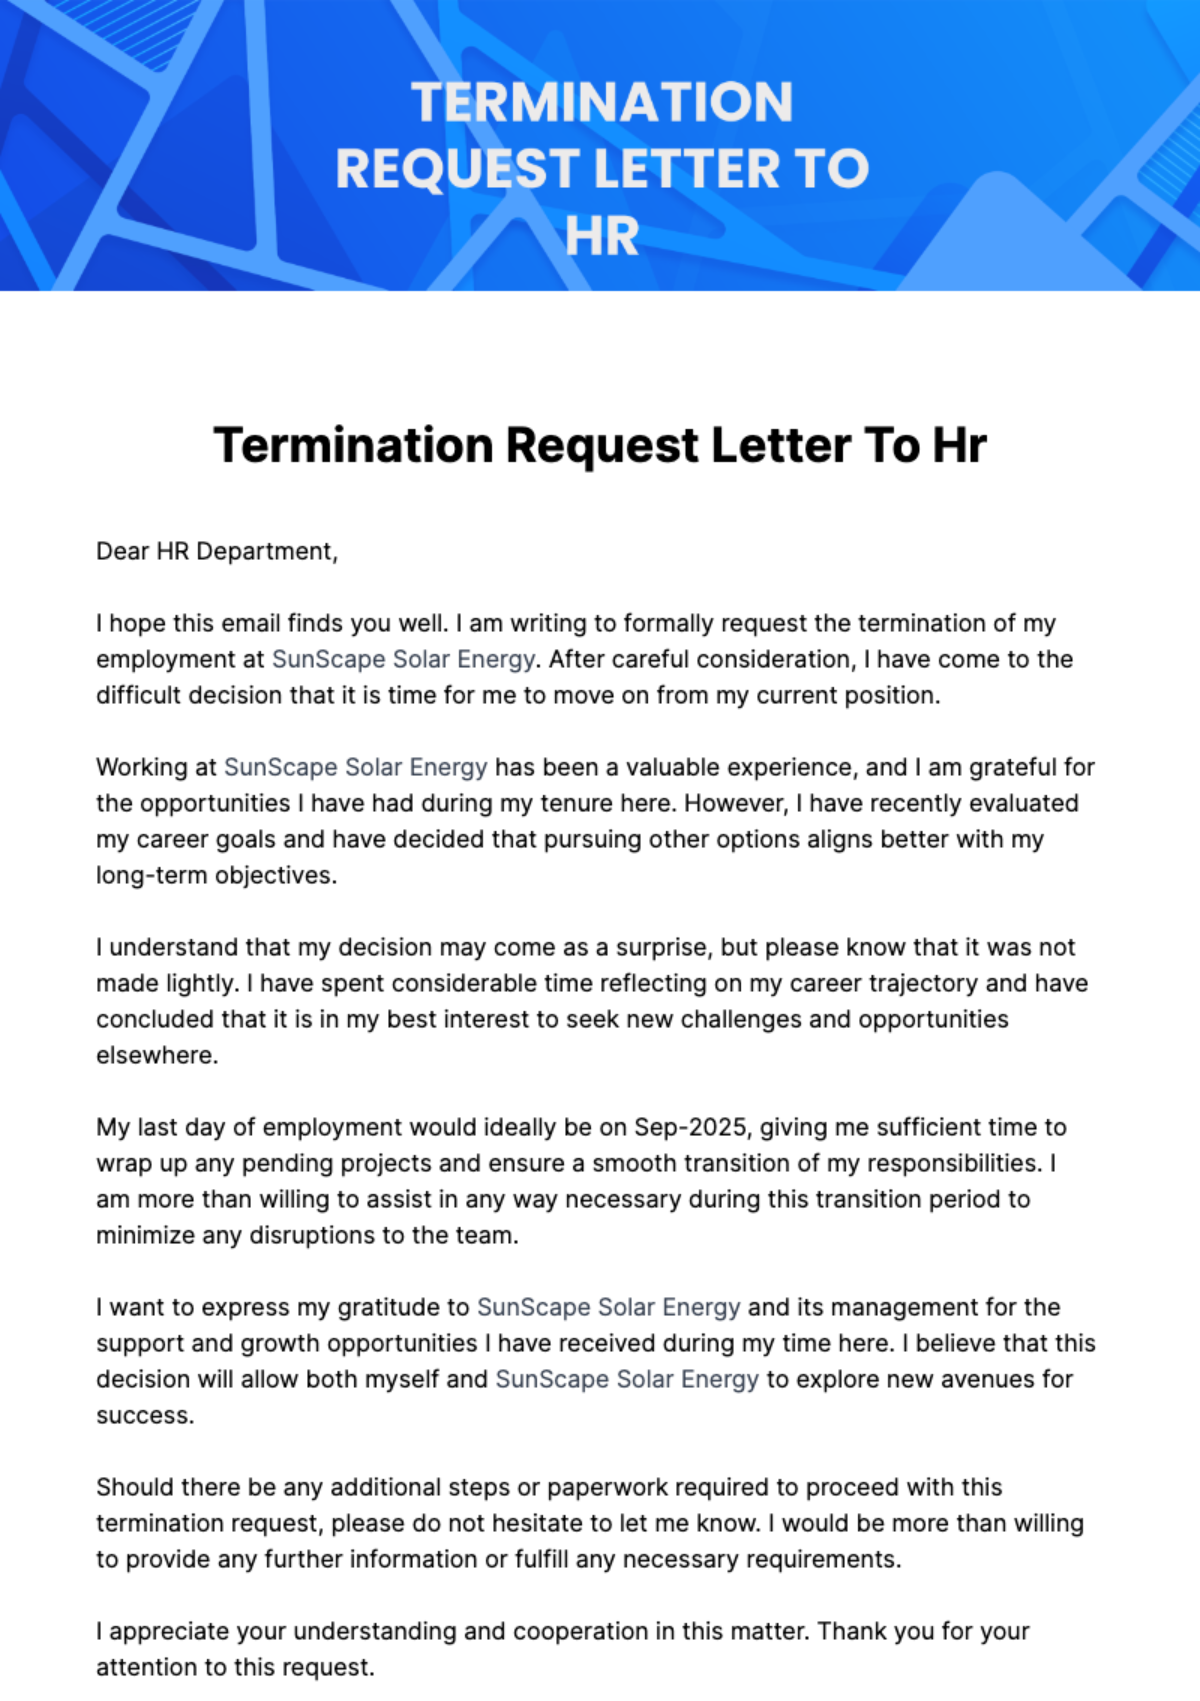 Free Termination Request Letter To Hr Template